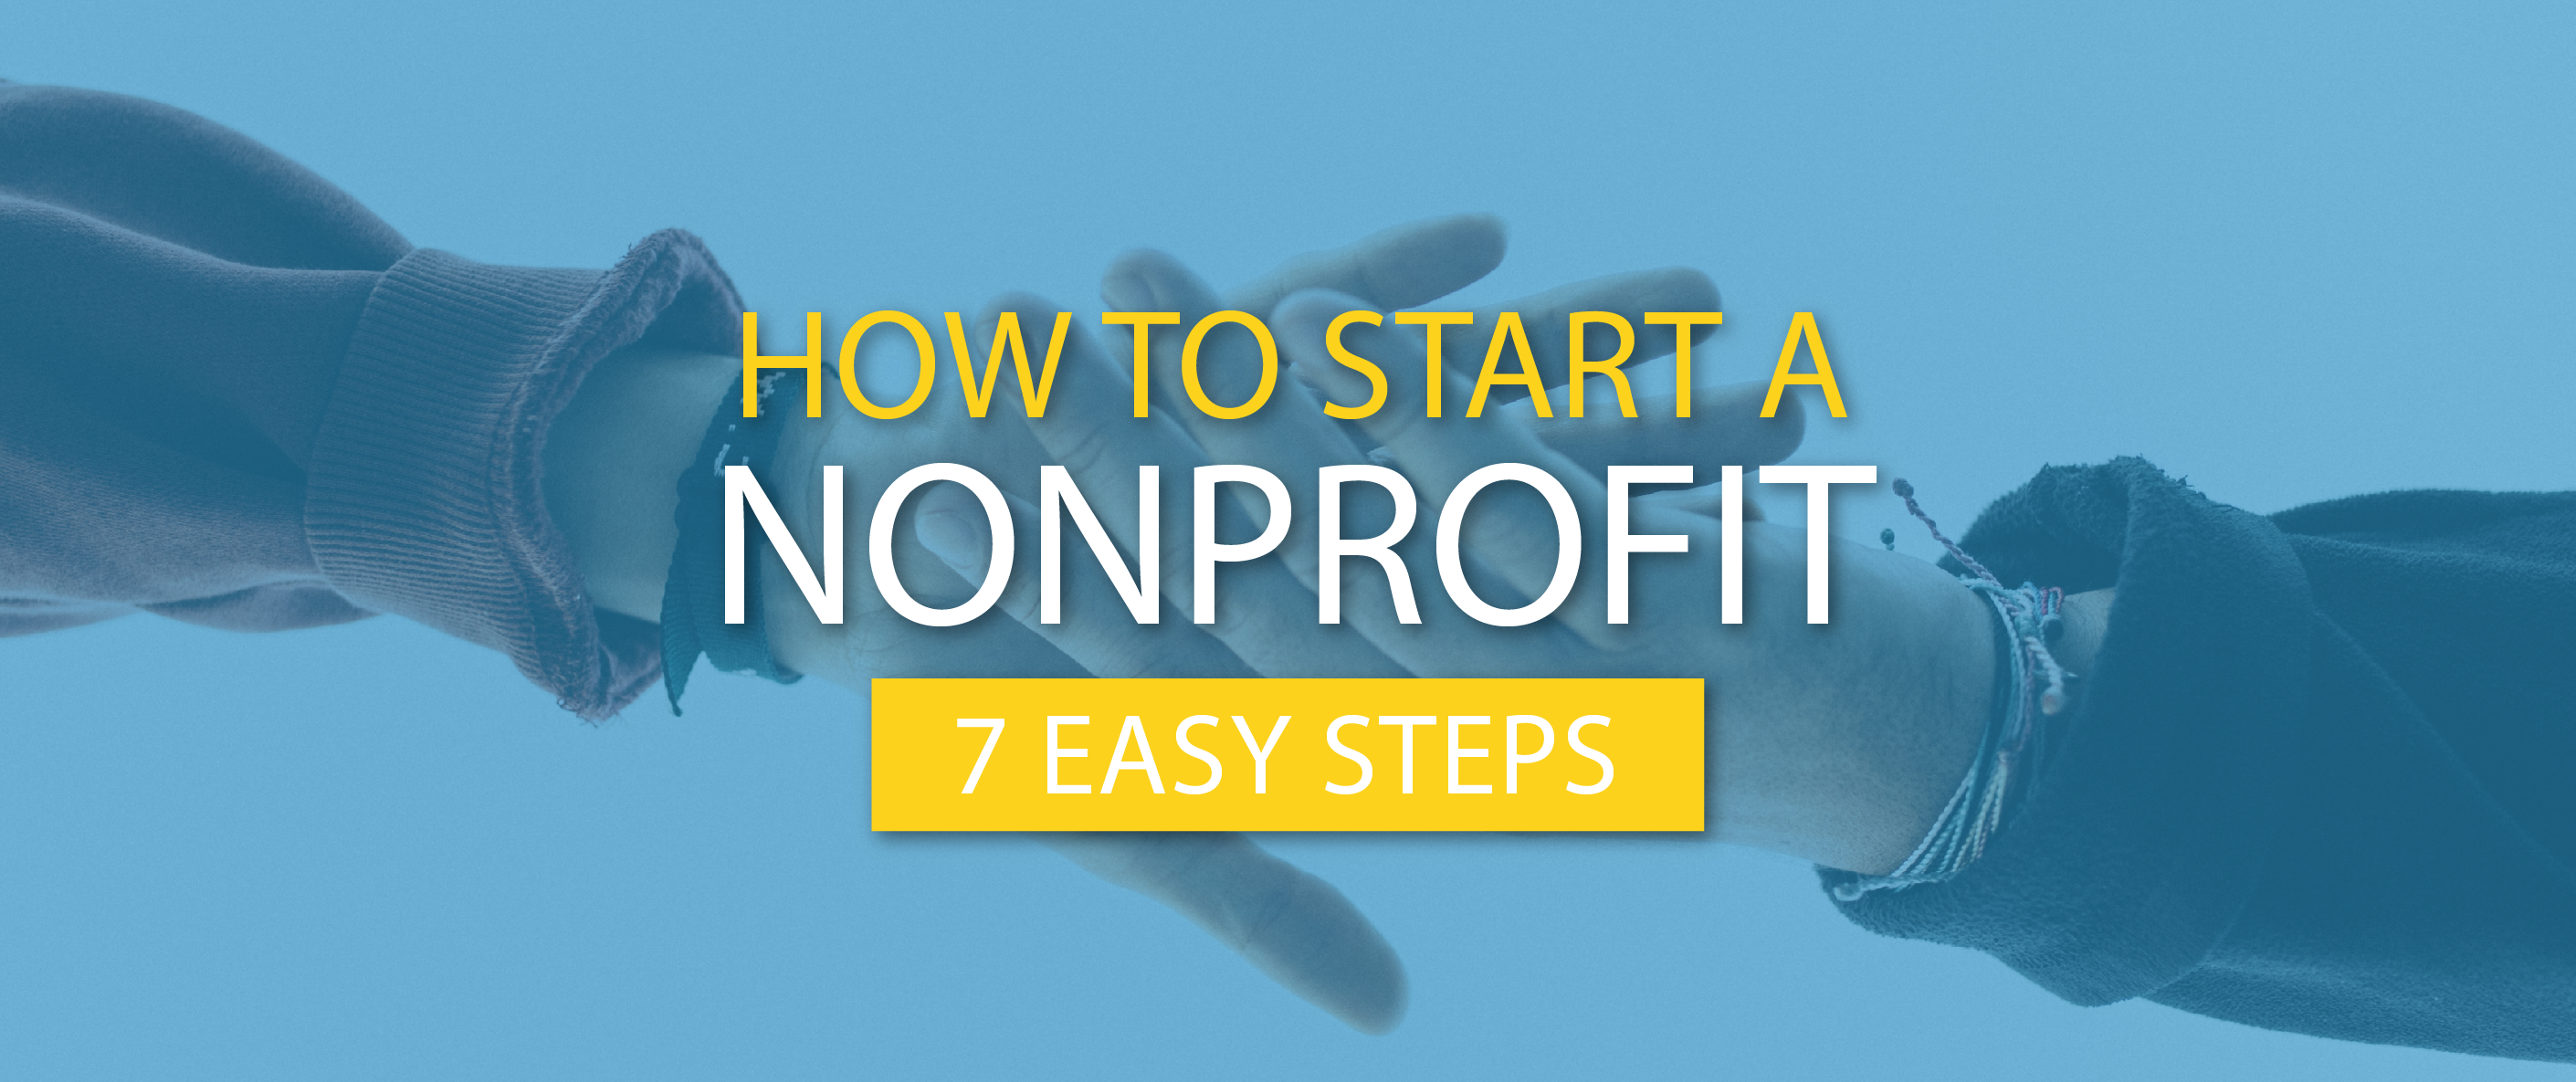 how to start a nonprofit feature image